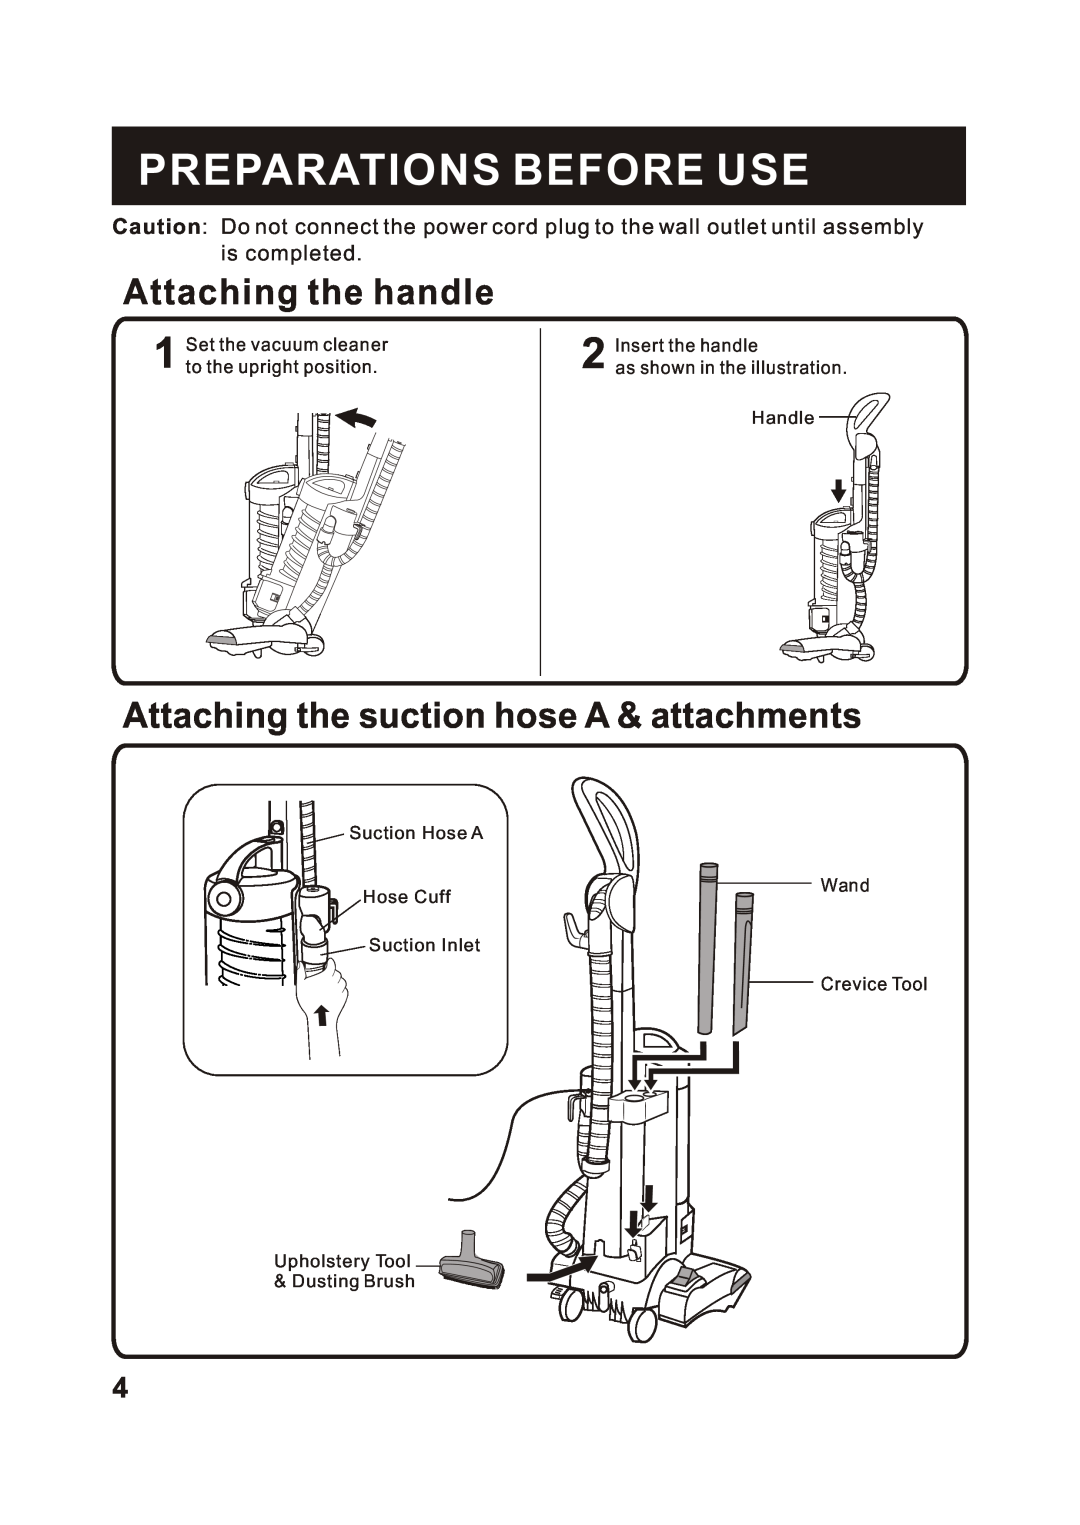 Fantom Vacuum FM742H Preparations Before Use, Attaching the handle, Attaching the suction hose A & attachments 